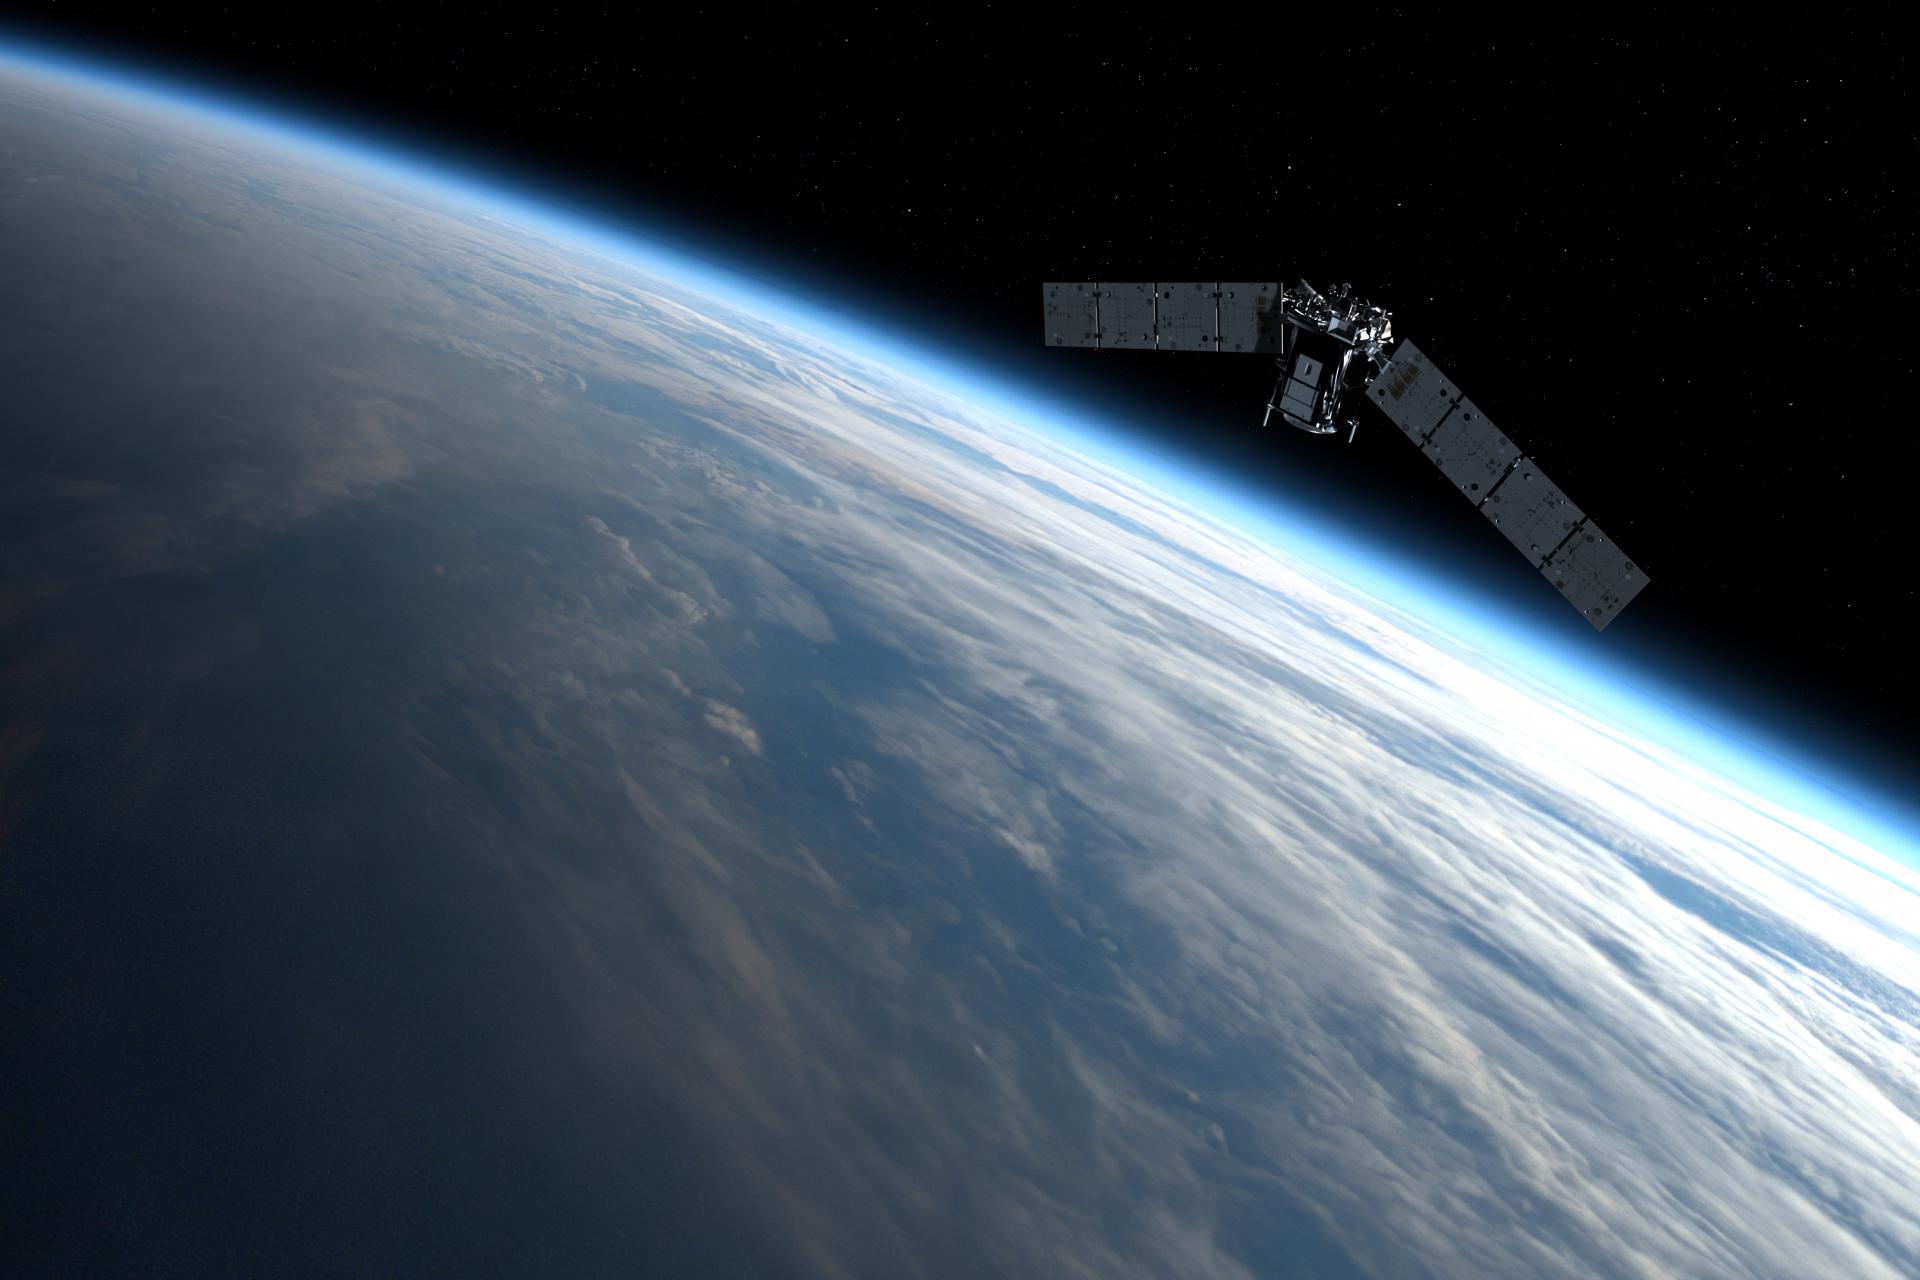 A spacecraft orbits high above the blue and cloud-covered Earth